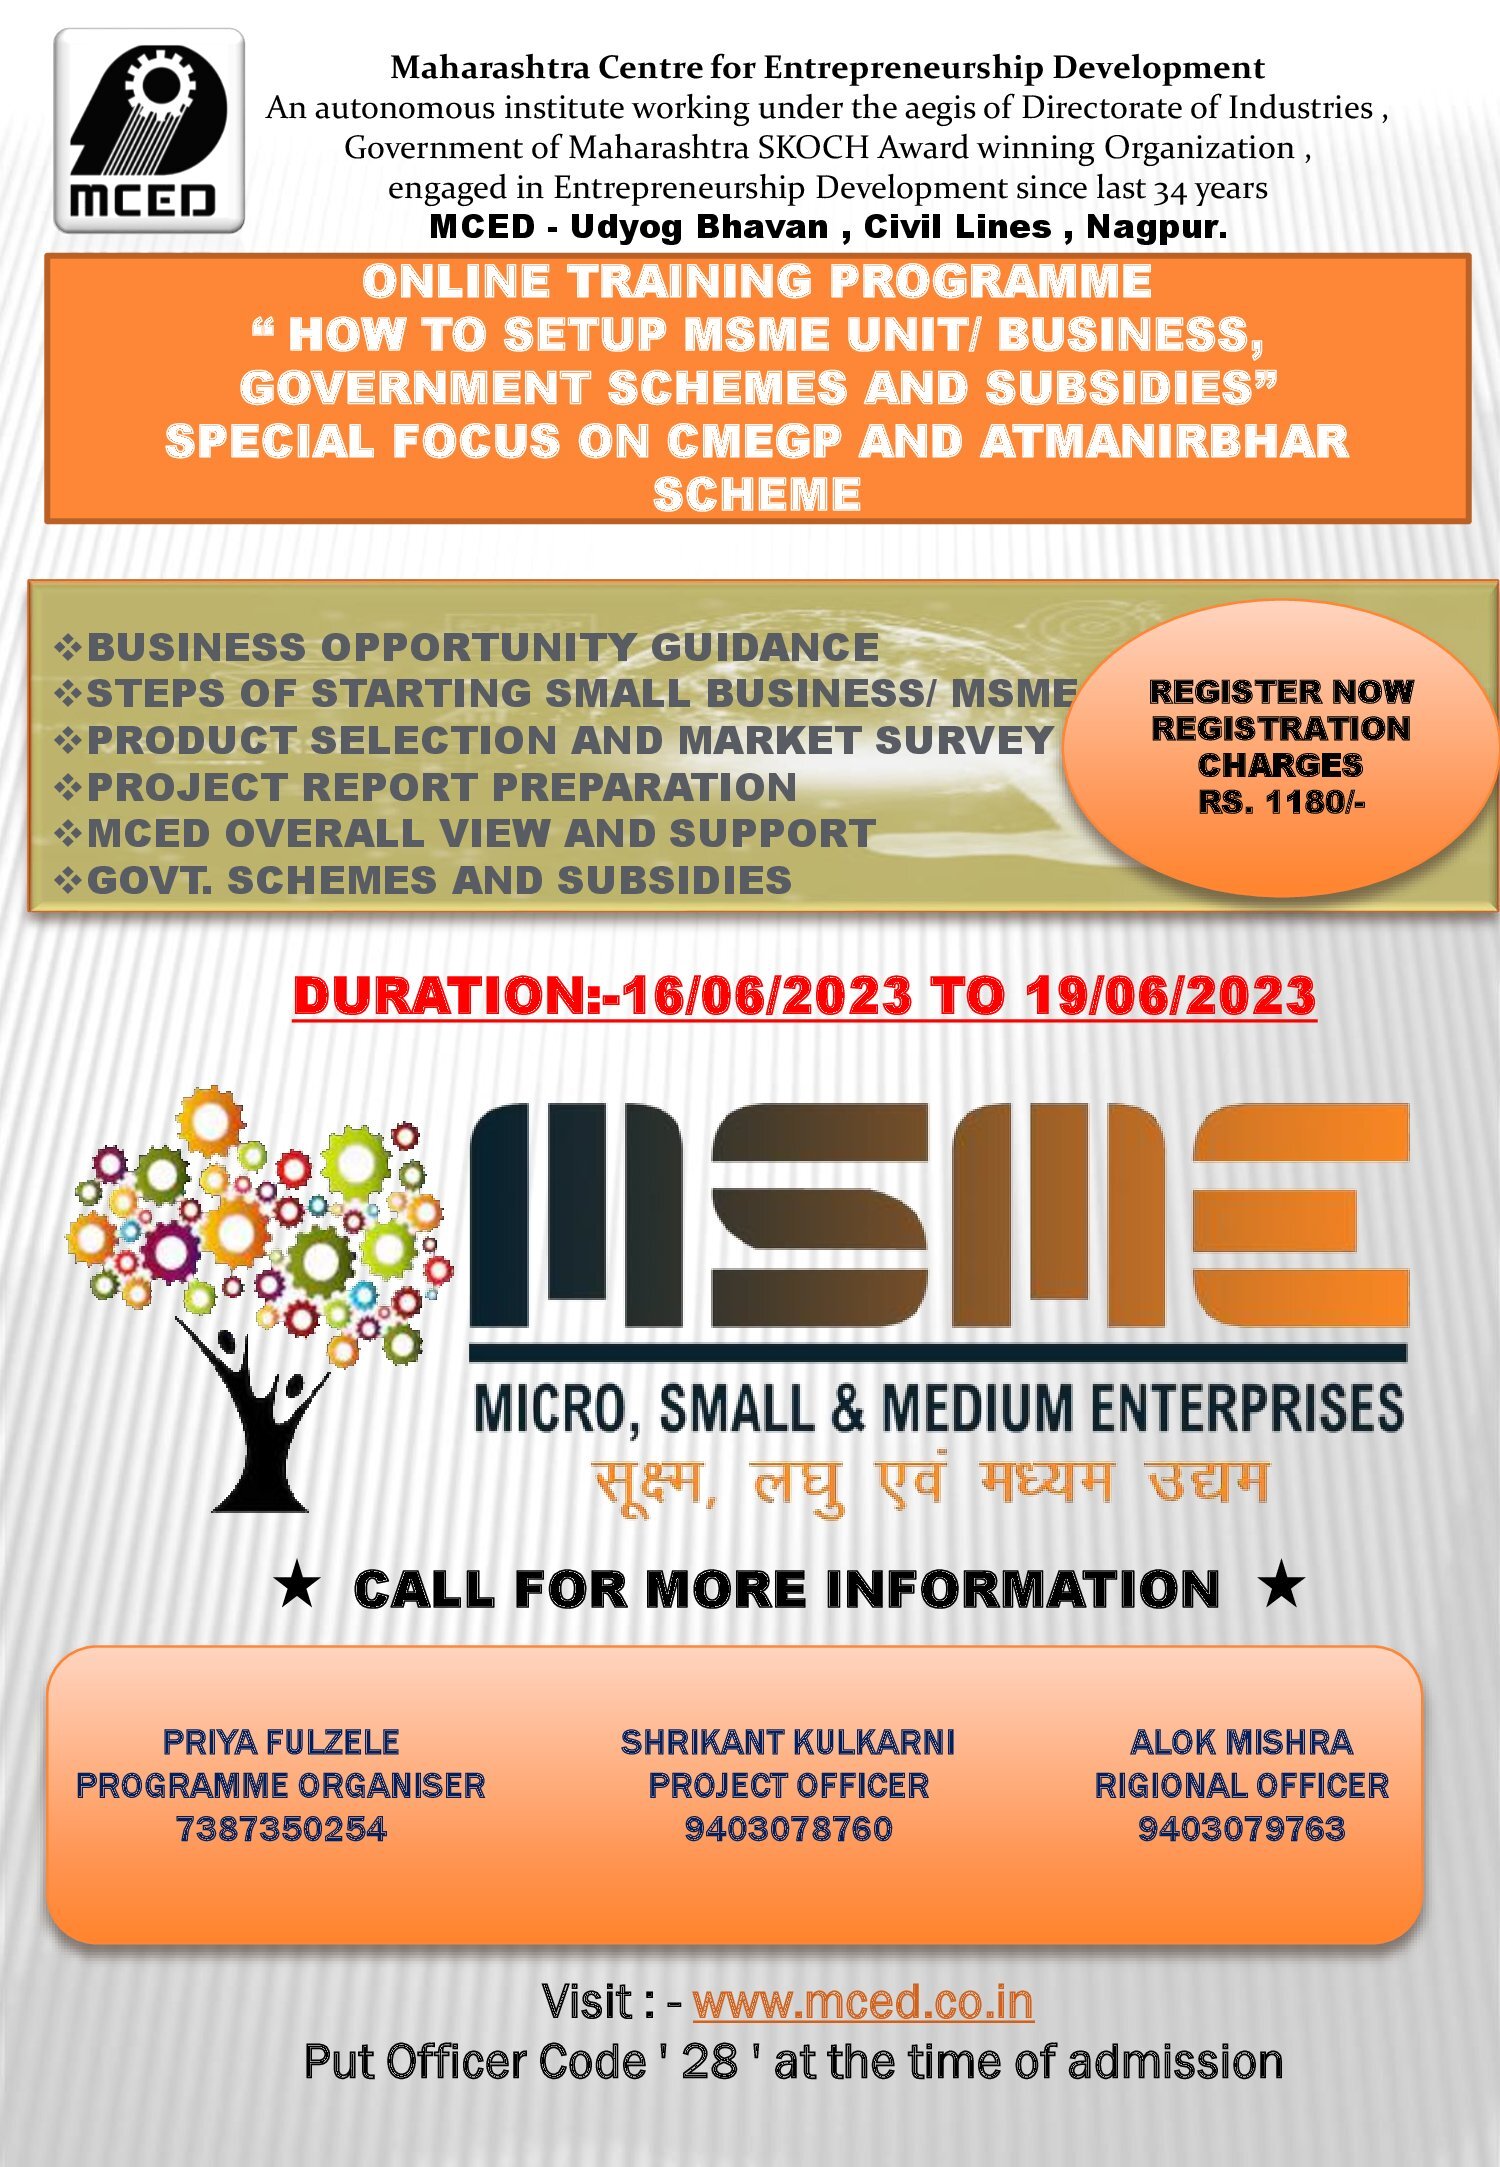 HOW TO SETUP MSME UNIT / BUSINESS, GOVERNMENT SCHEMES AND SUBSIDIES